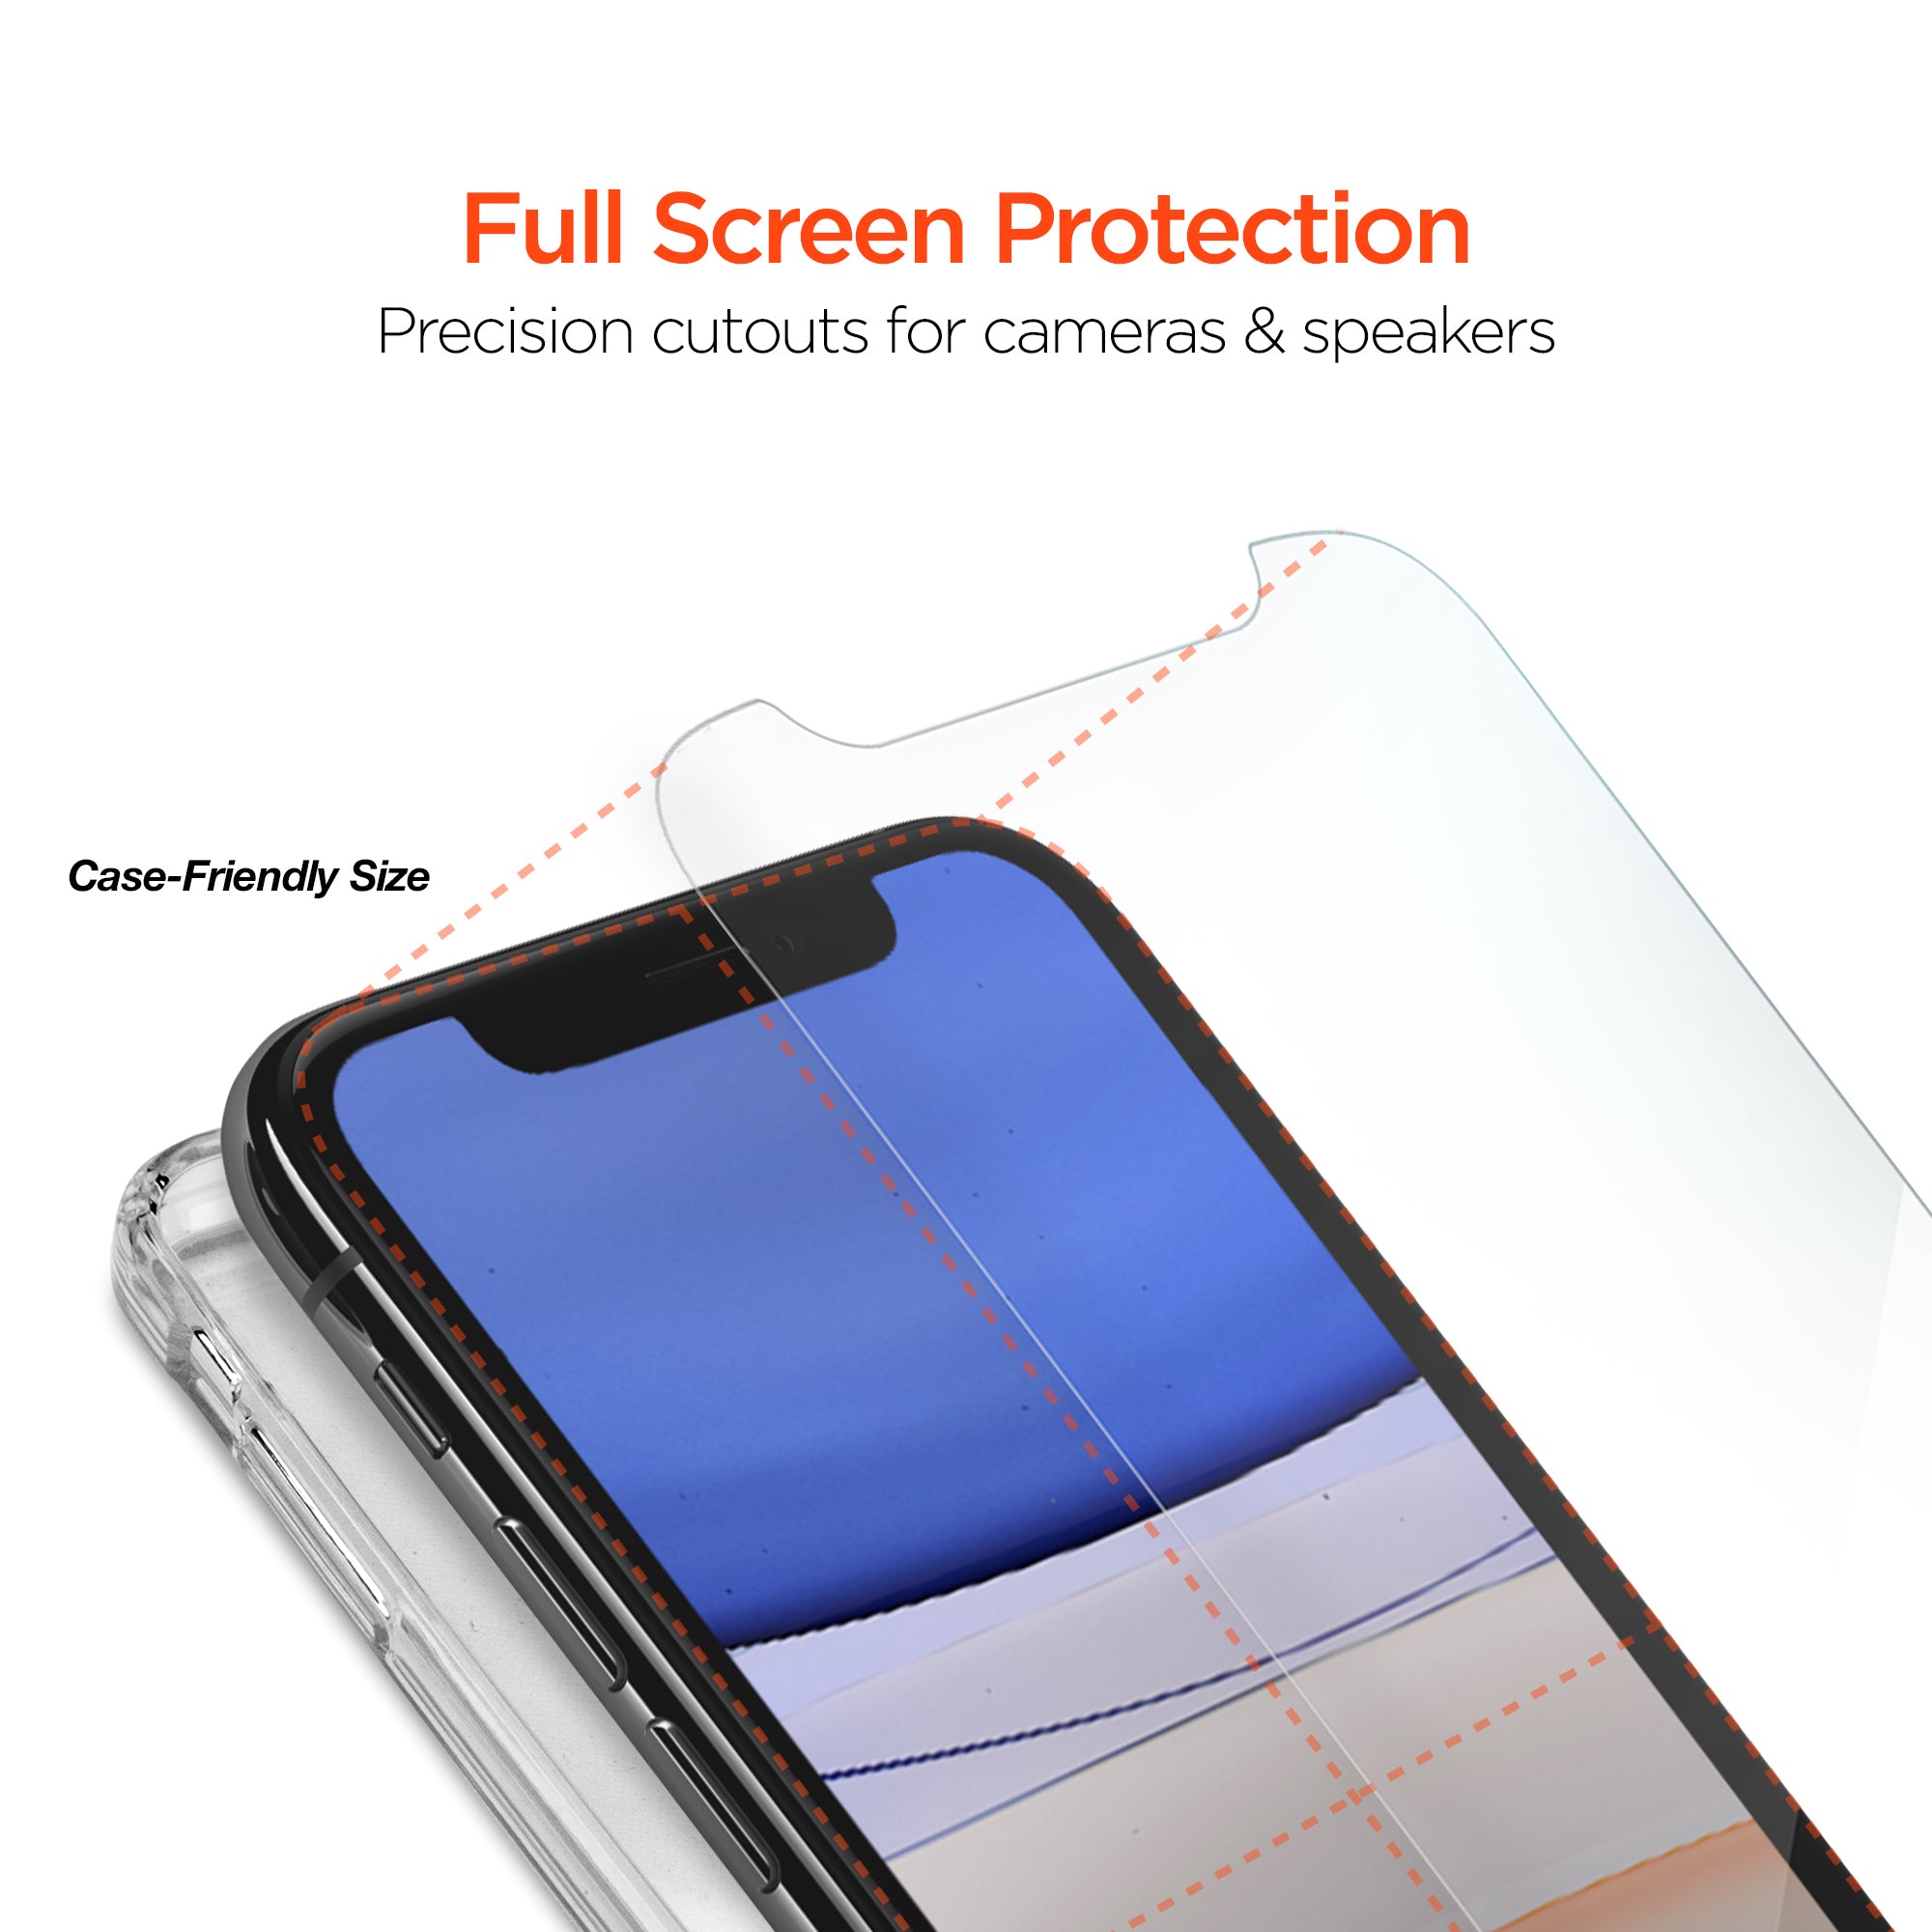 Will iPhone 11 screen protectors fit the iPhone 12 Pro